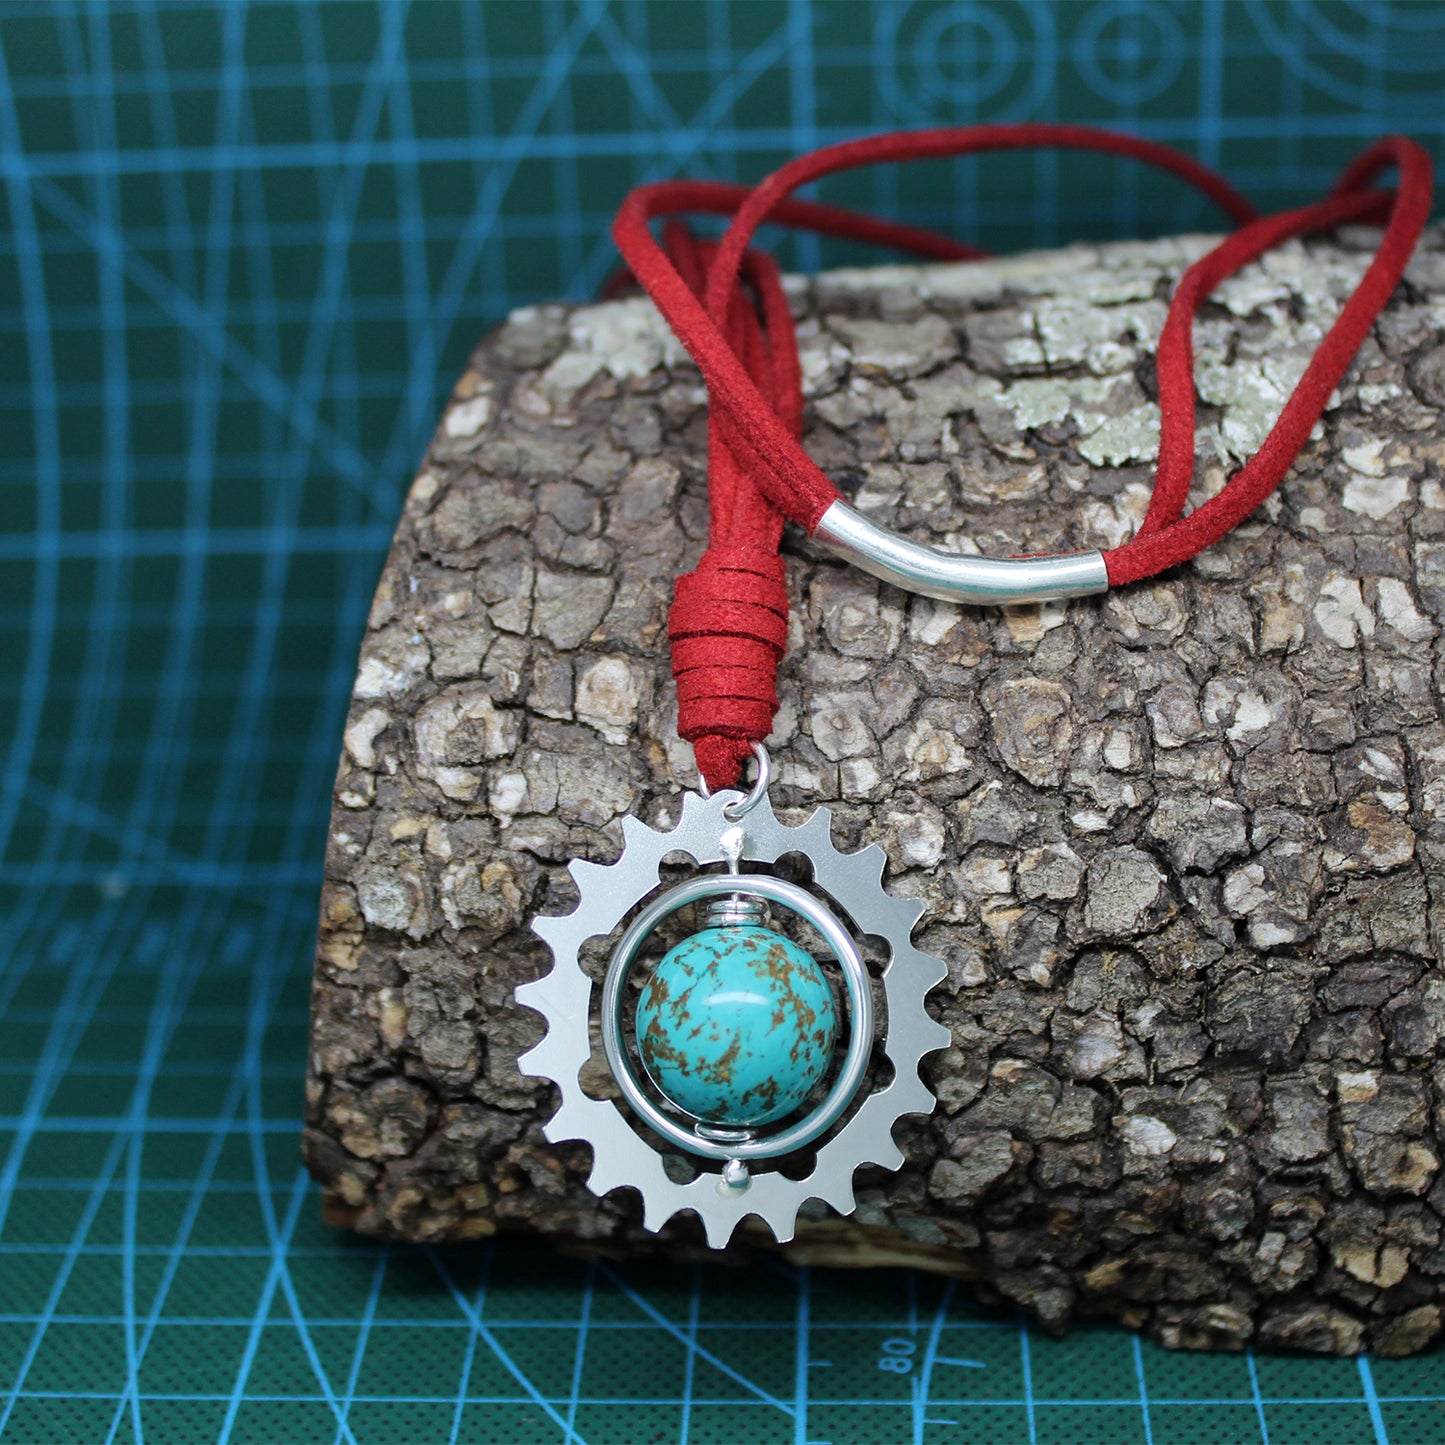 Bonnie's pendant in 925 Silver, leather and turquoise